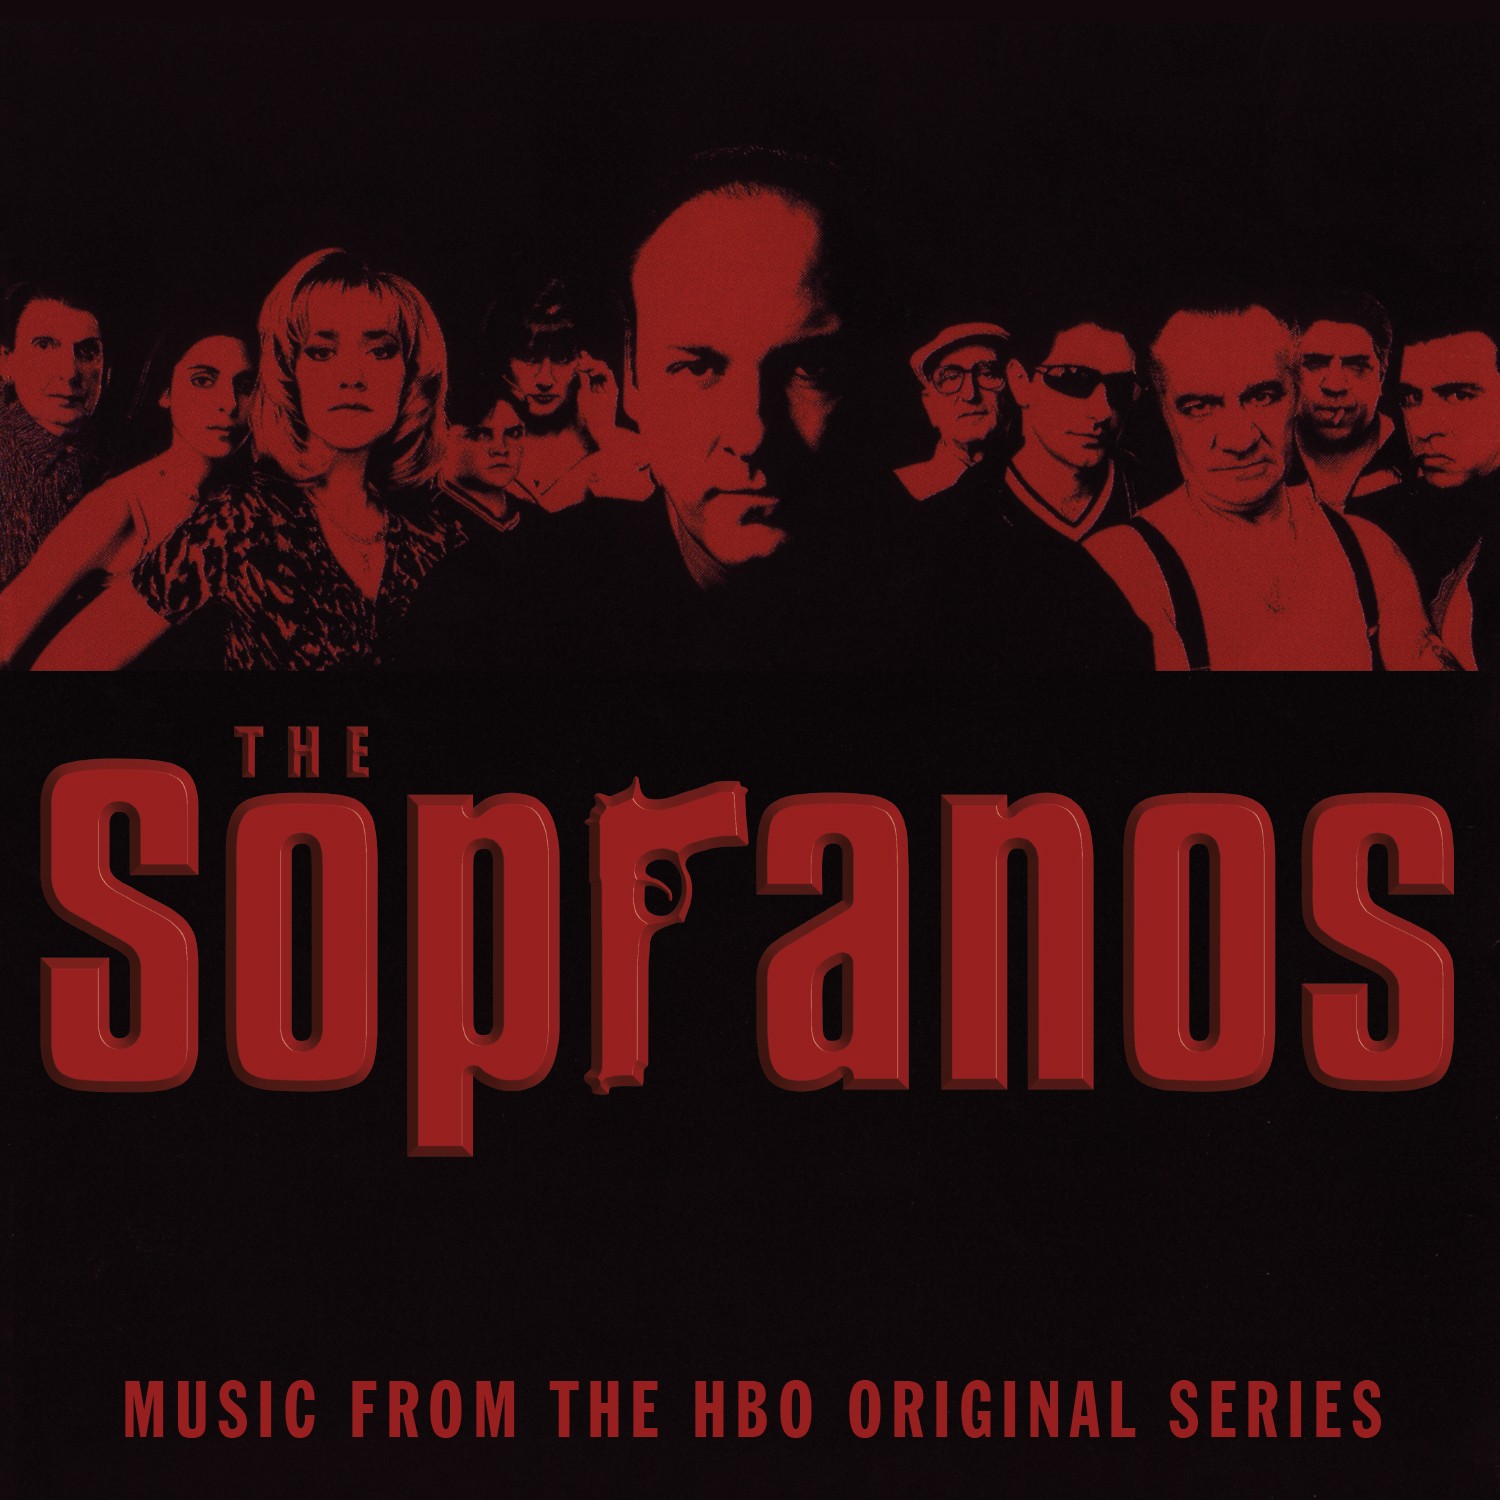 Soundtrack - Sopranos: Music From The HBO Original Series (Red w/ Black Smoke) 2XLP